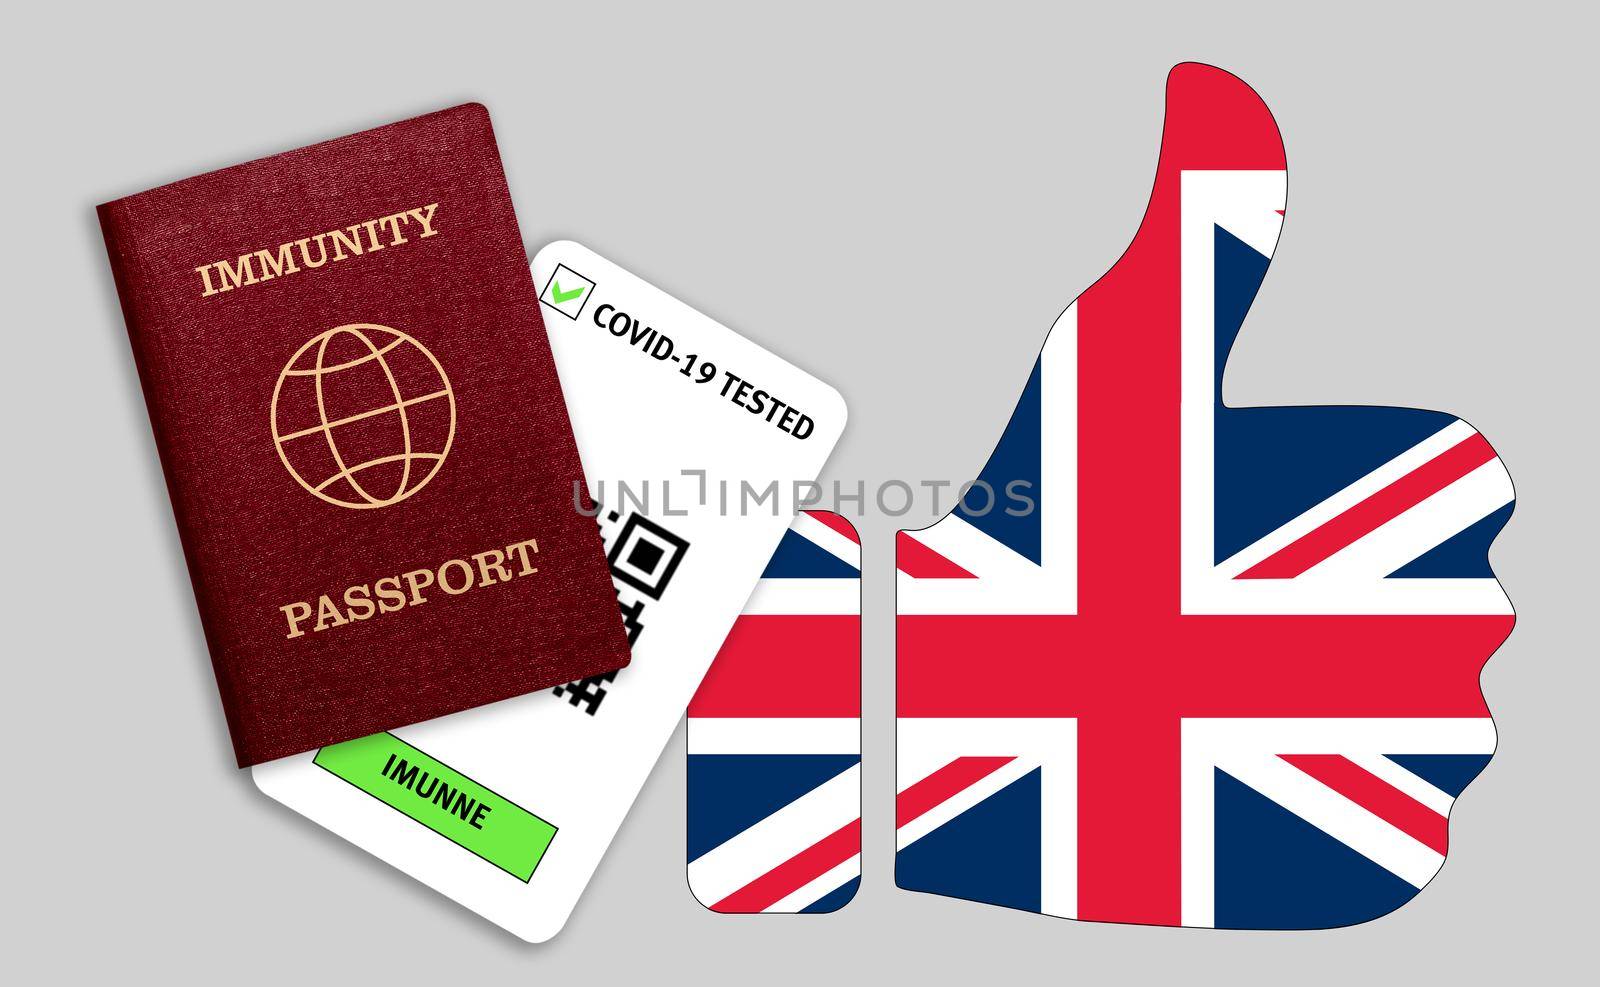 Immune passport and coronavirus test with thumb up with flag of United Kingdom. Concept of immunity to COVID-19. Certificate for people who have had coronavirus or made vaccine.